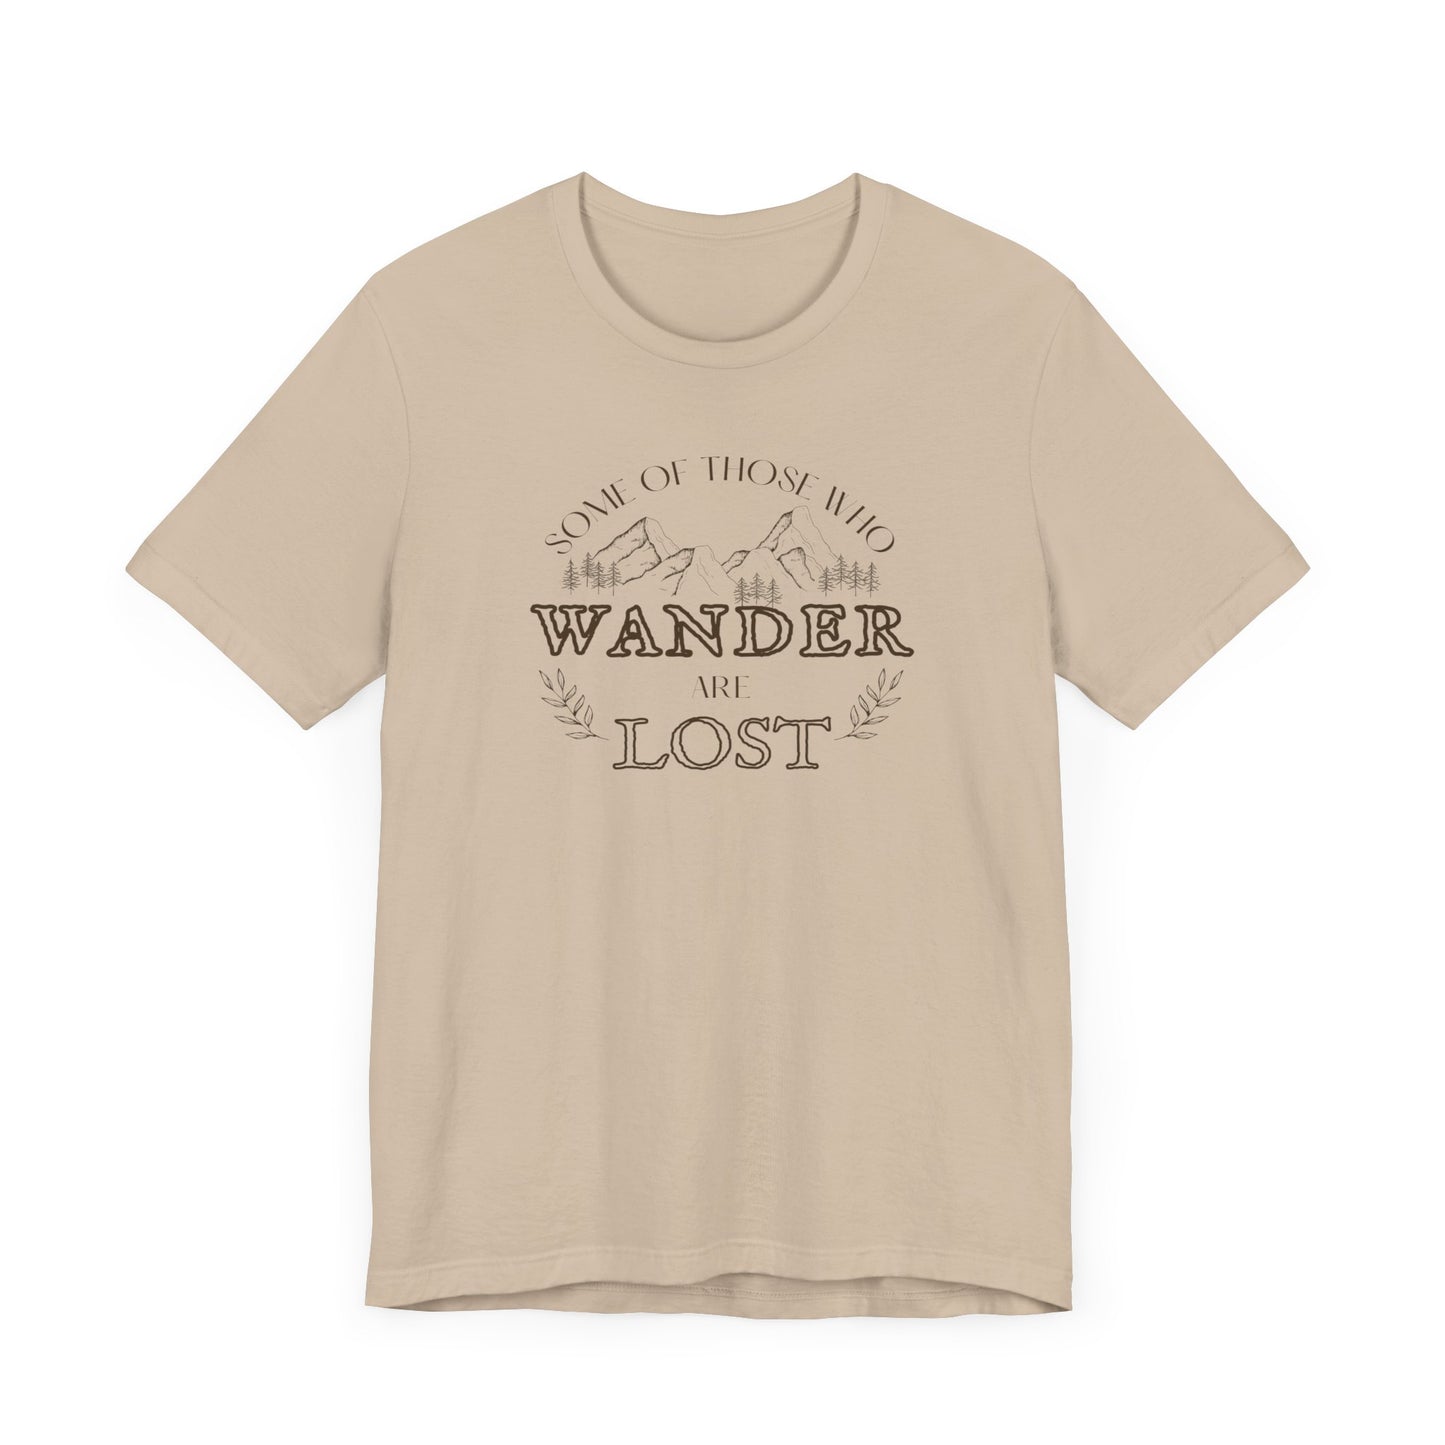 Some Of Us Who Wander | T Shirt